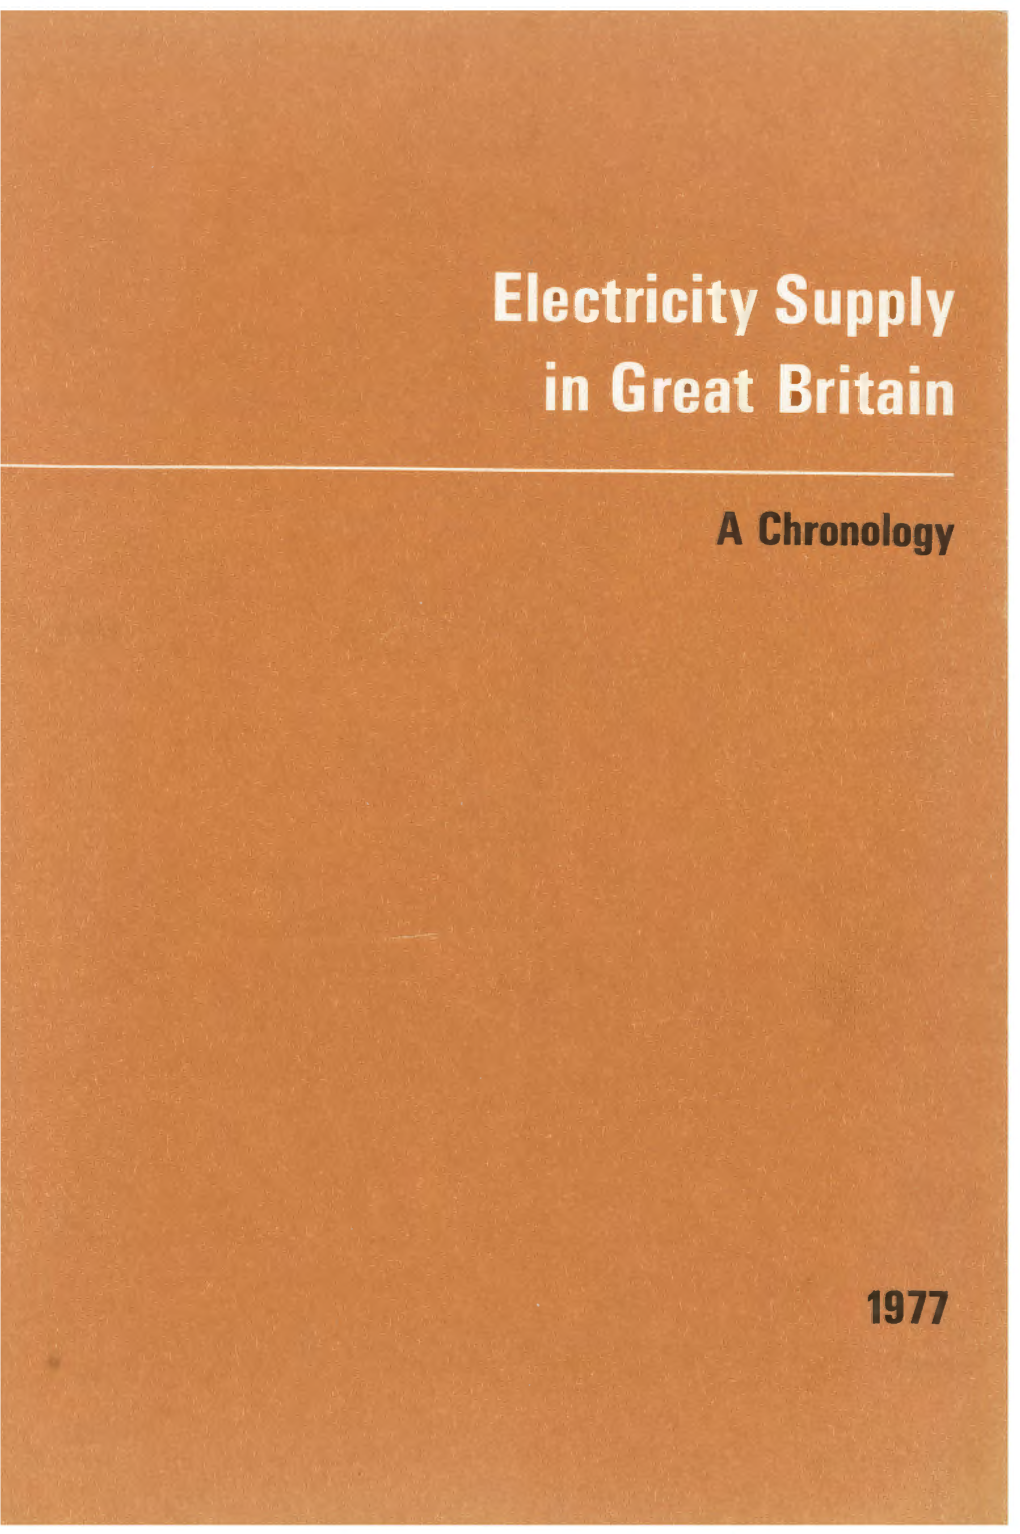 Electricity Supply in Great Britain